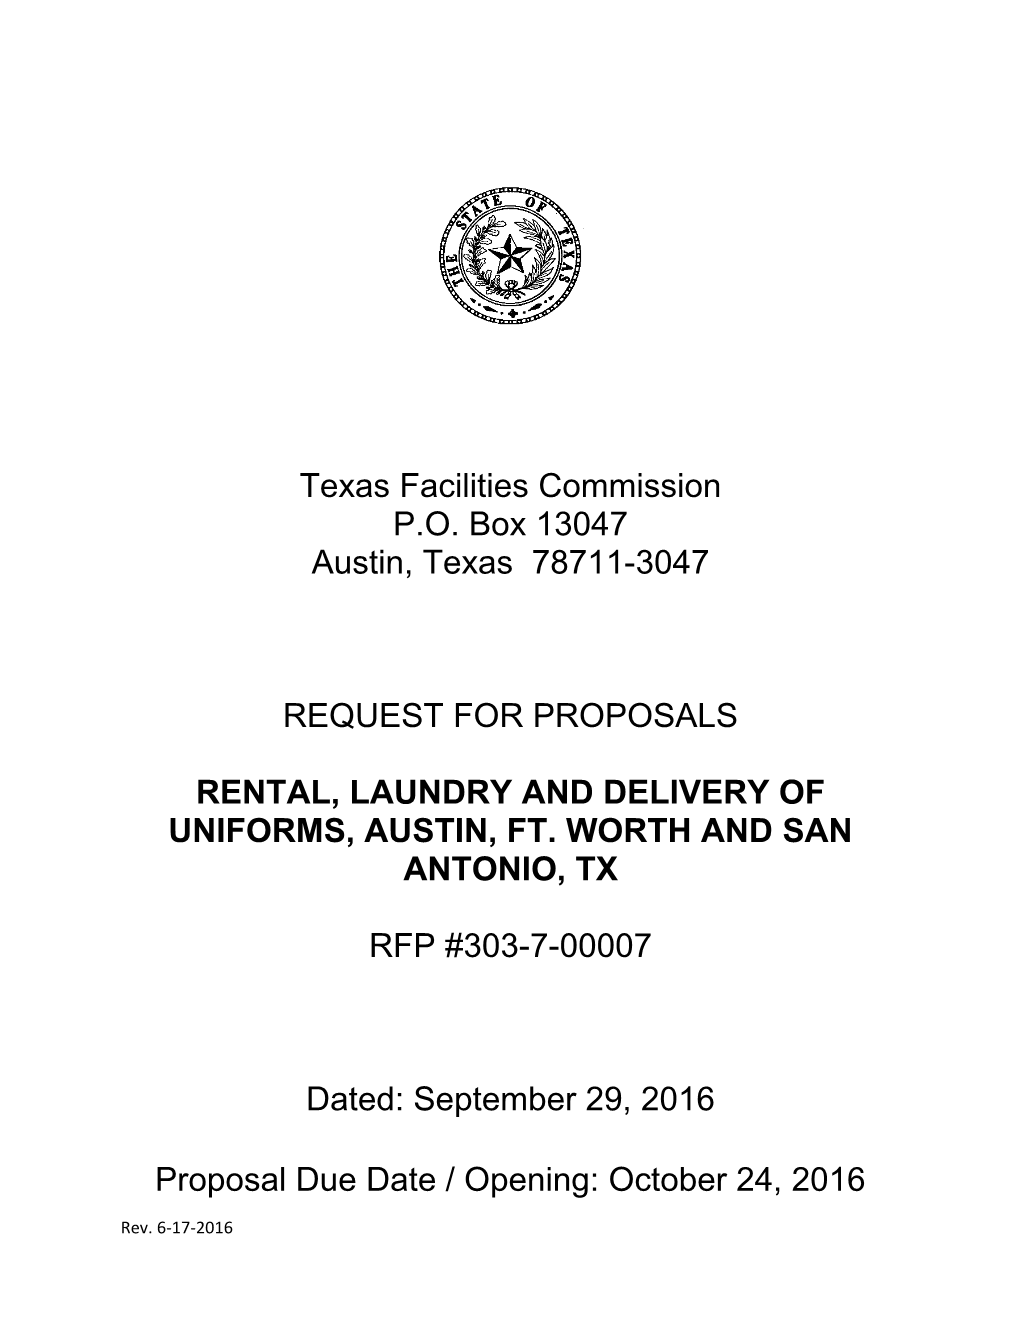 Rental, Laundry and Delivery of Uniforms, Austin, Ft. Worth and San Antonio, Tx